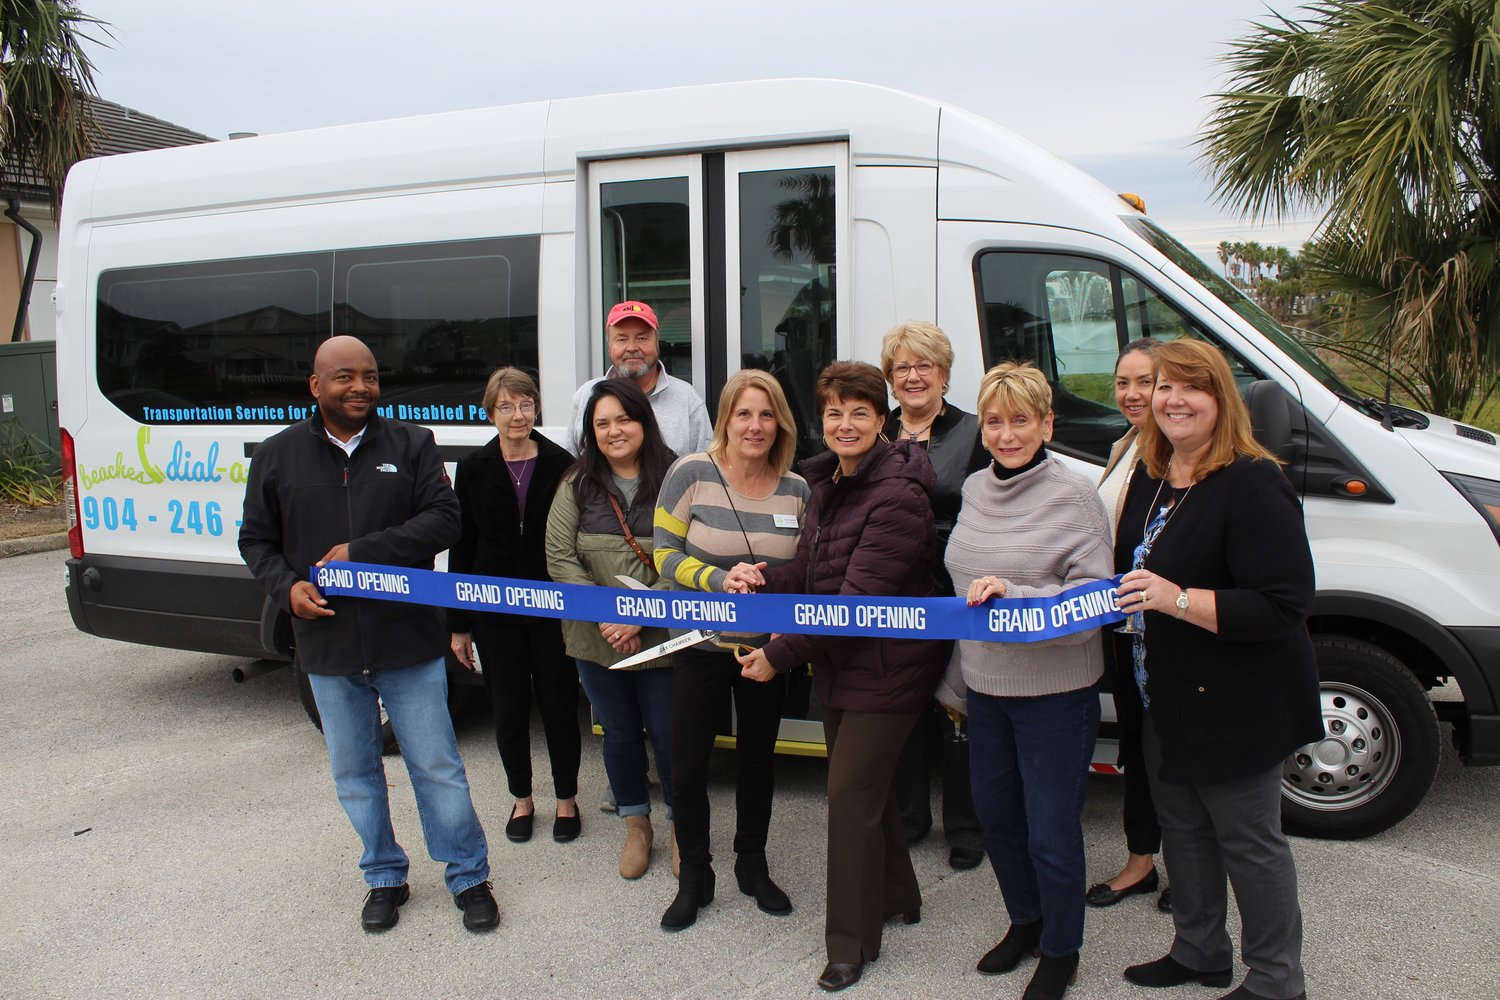 Beaches Council on Aging staff and board, including President Vicki Wyckoff and Executive Director Lori Anderson, with the scissors, are seen next to Neptune Beach Mayor Elaine Brown.